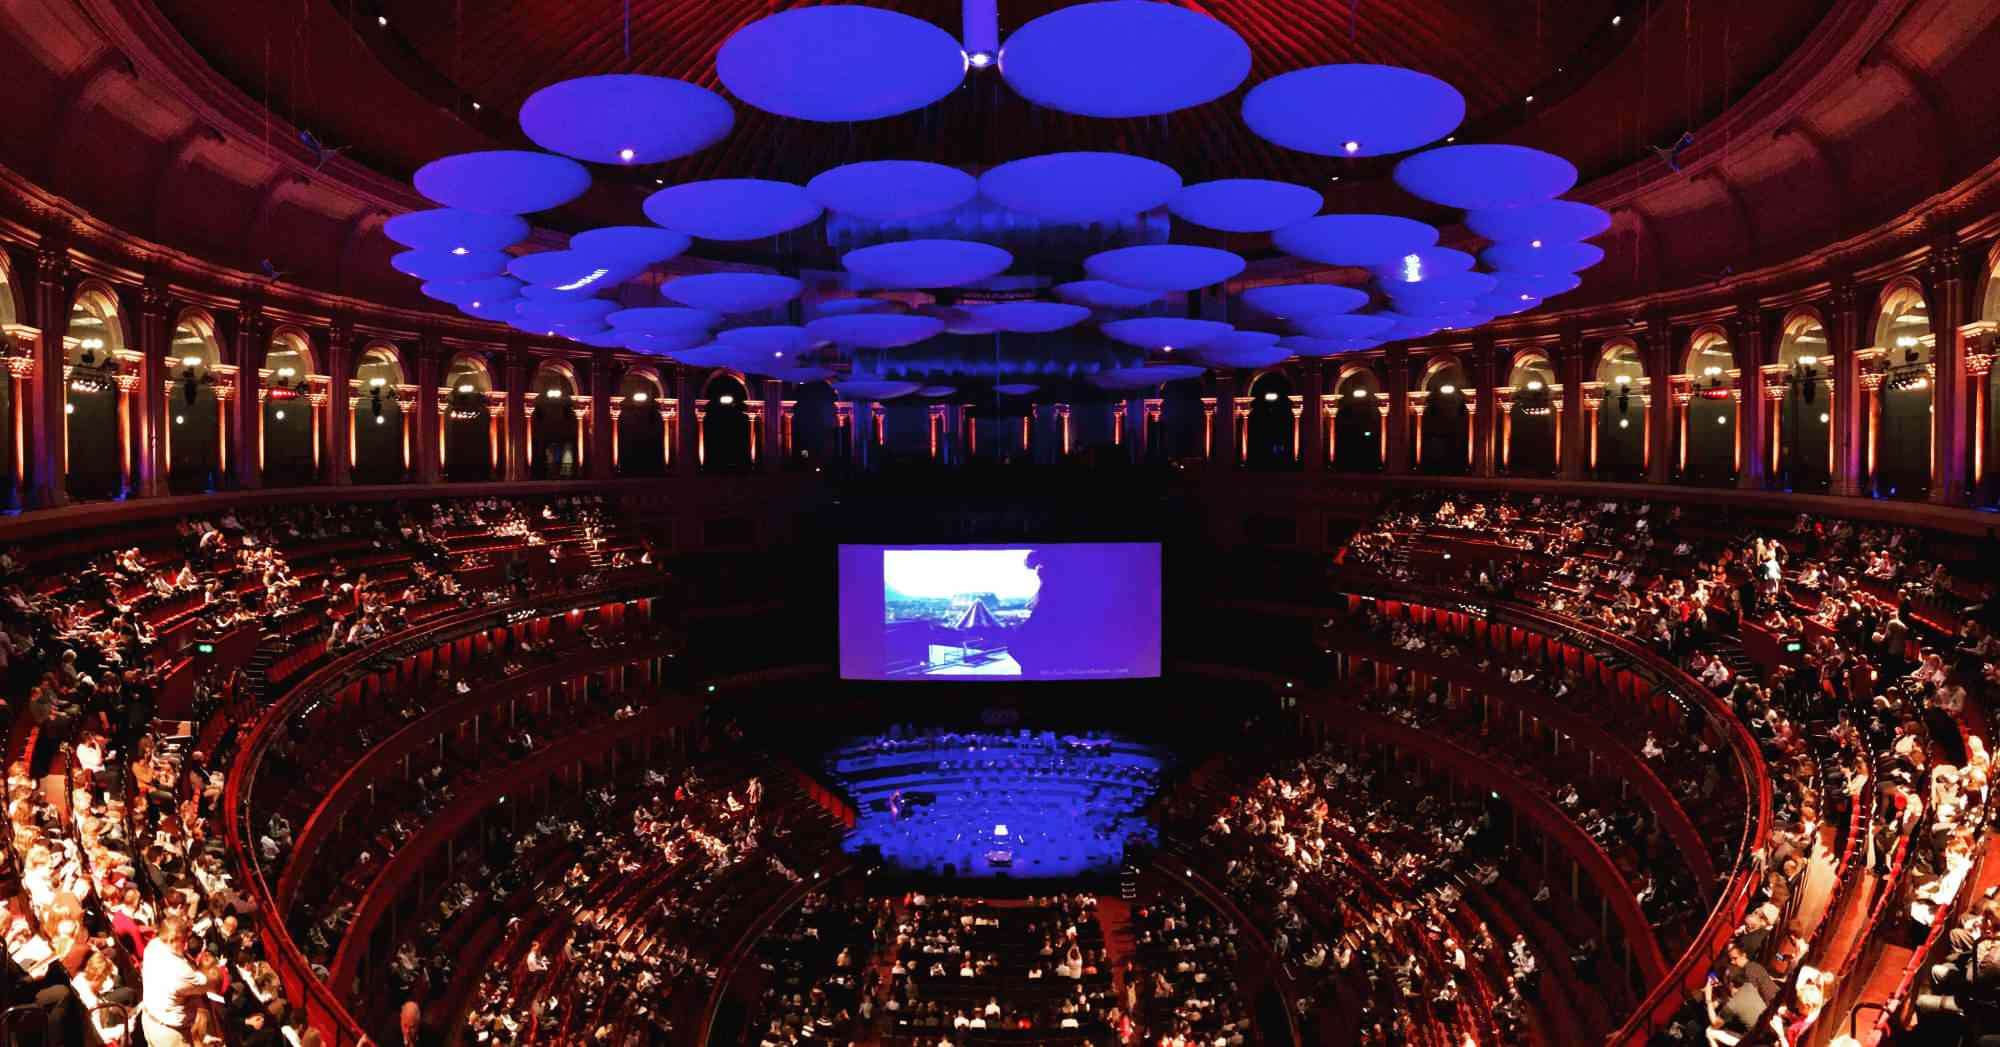 View from Seat Block Gallery at Royal Albert Hall